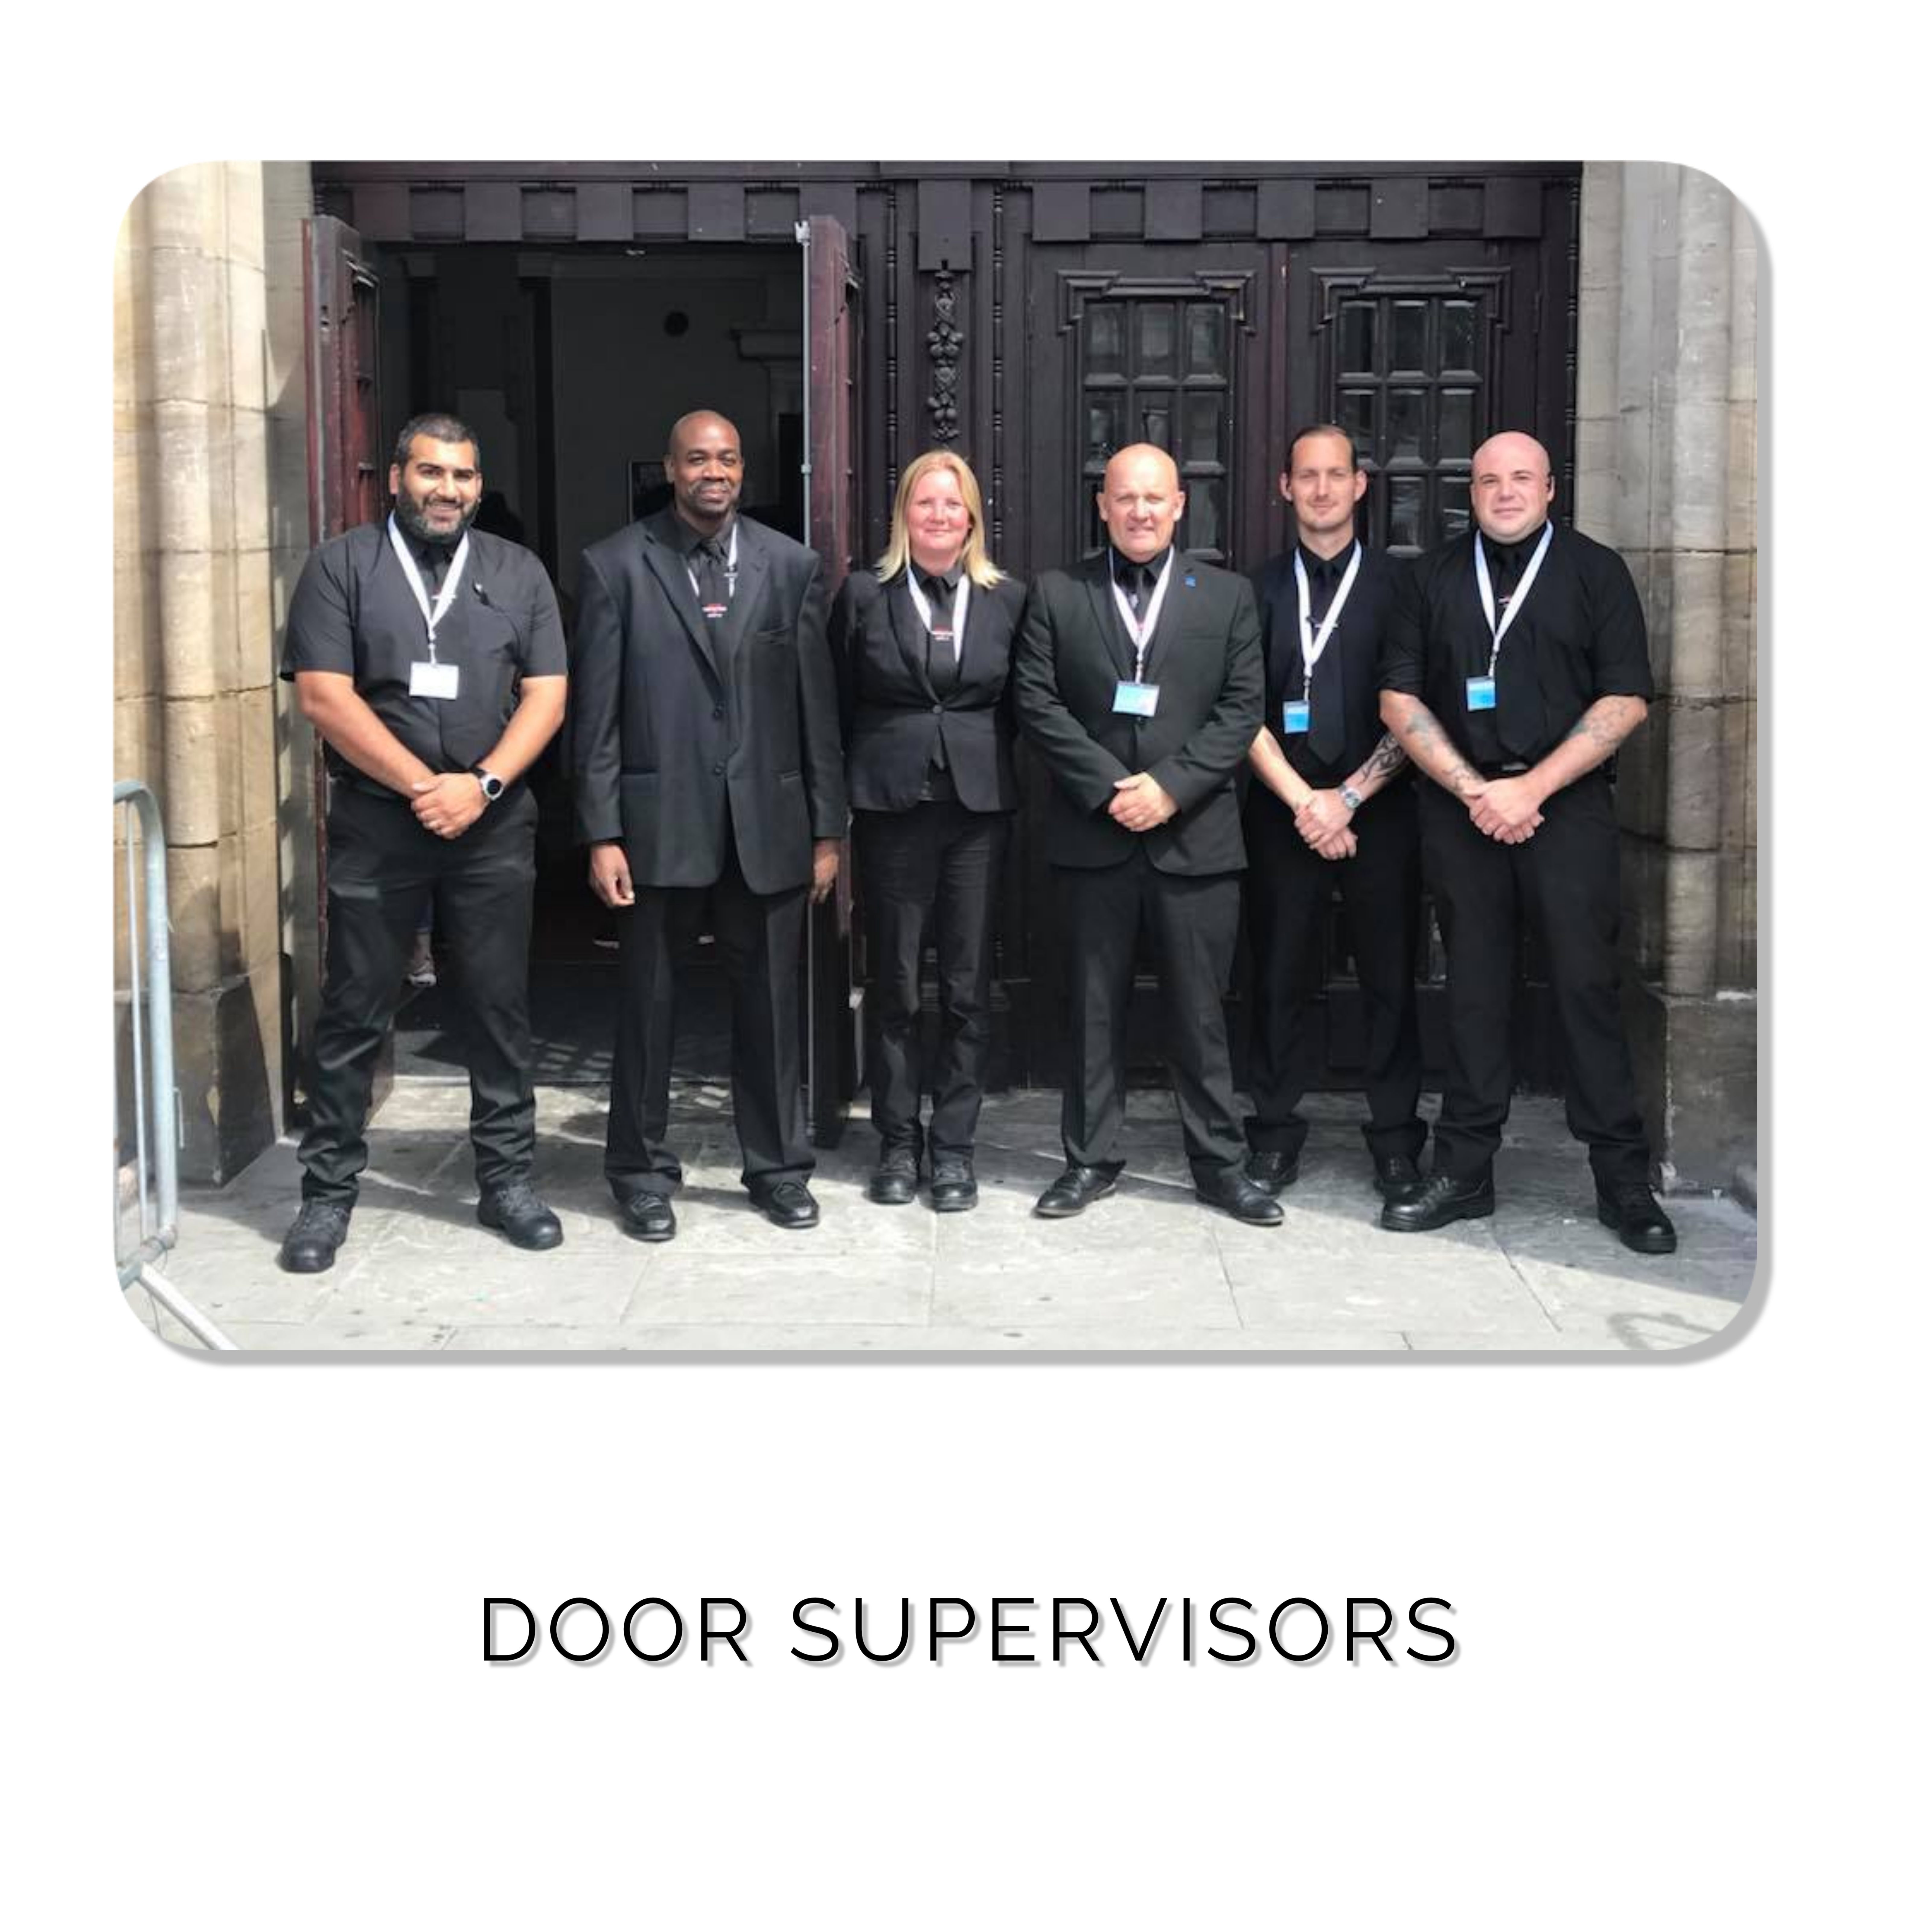 Door Supervisors, Security Guards, Security Guarding, Security Officers